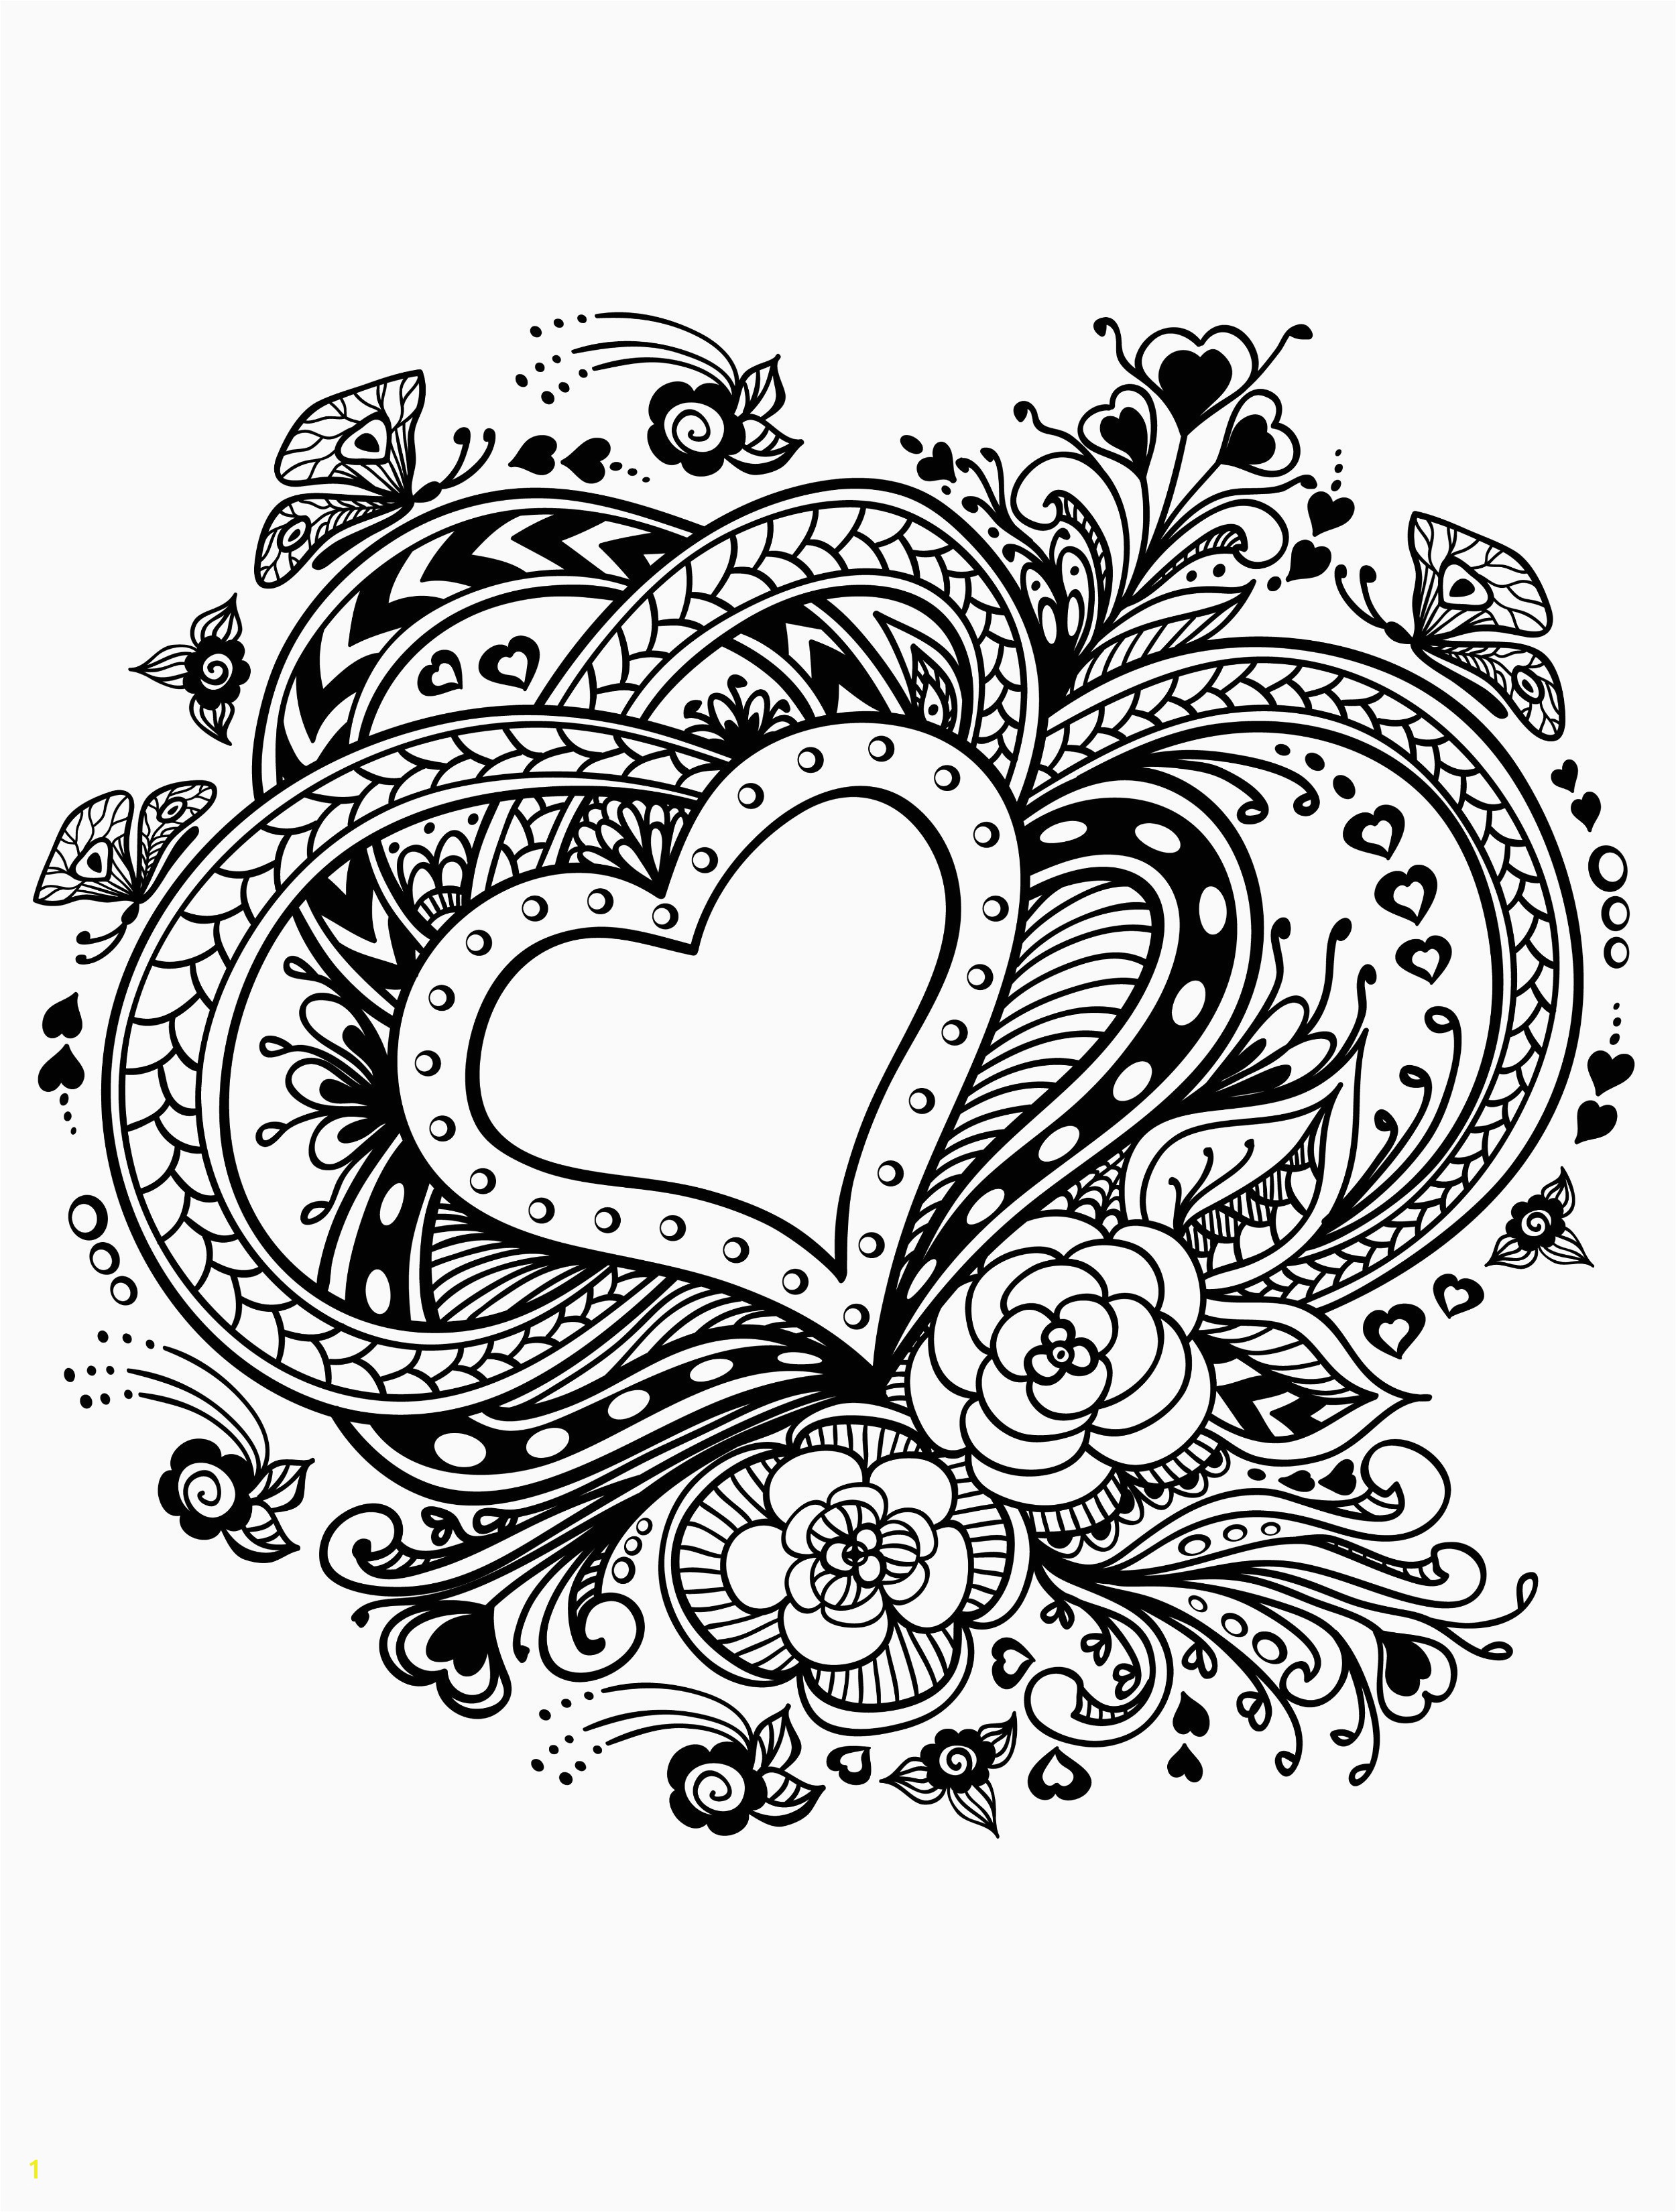 Hearts and butterflies Coloring Pages Elegant butterfly Heart Coloring Pages Katesgrove